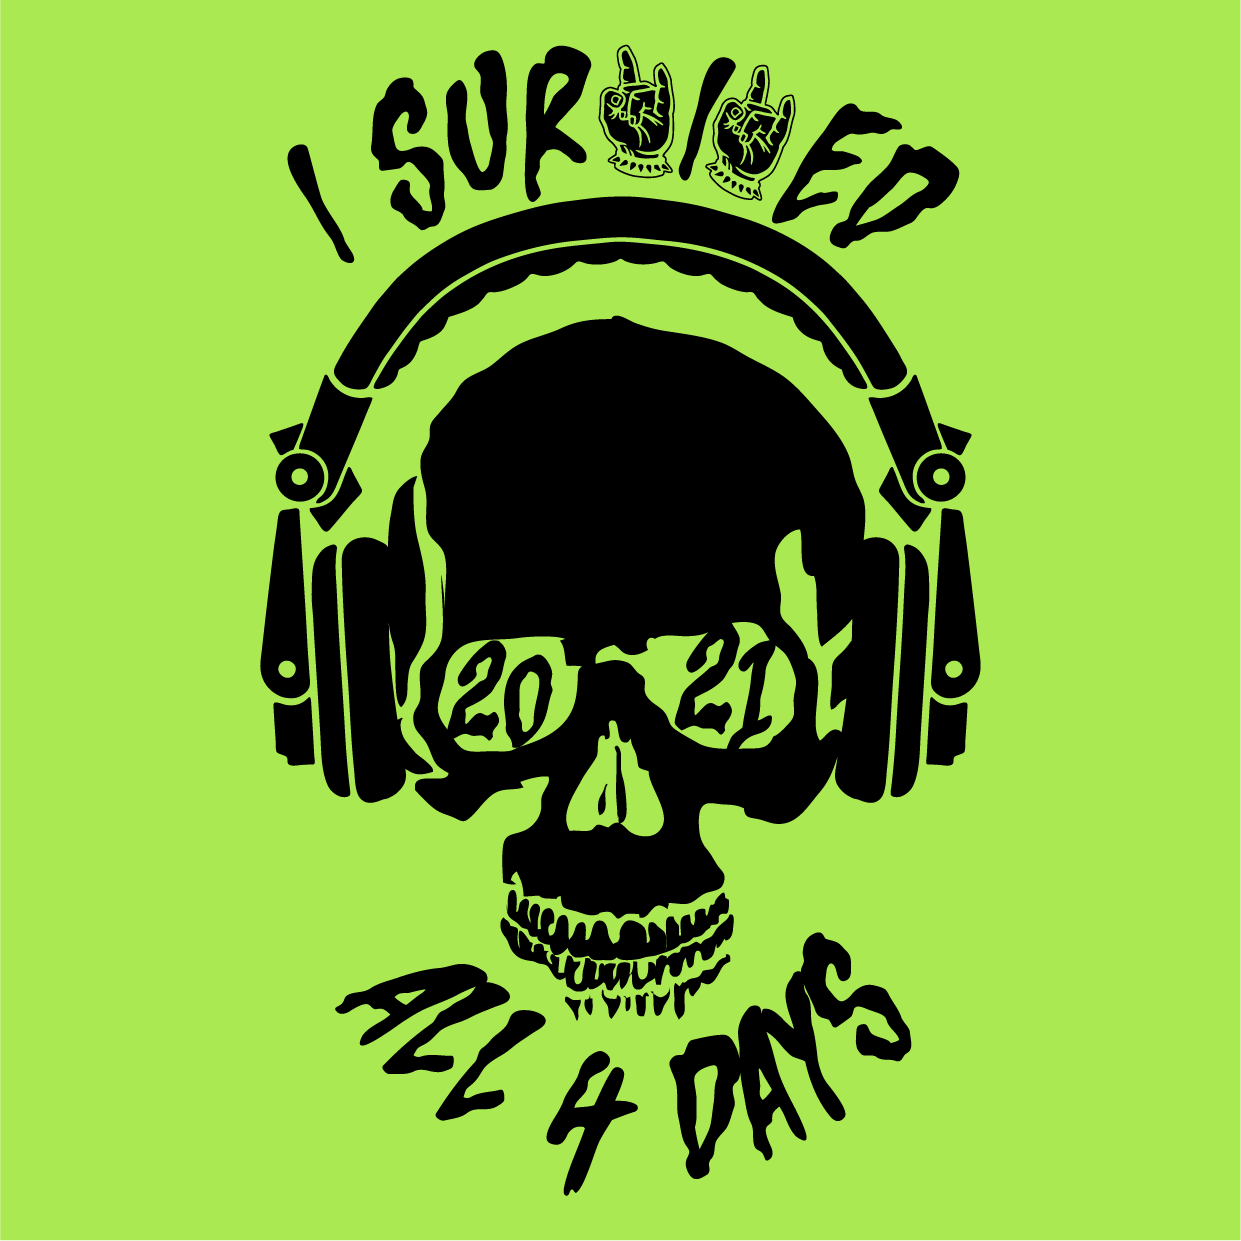 The Return and Survived 21 shirt design - zoomed